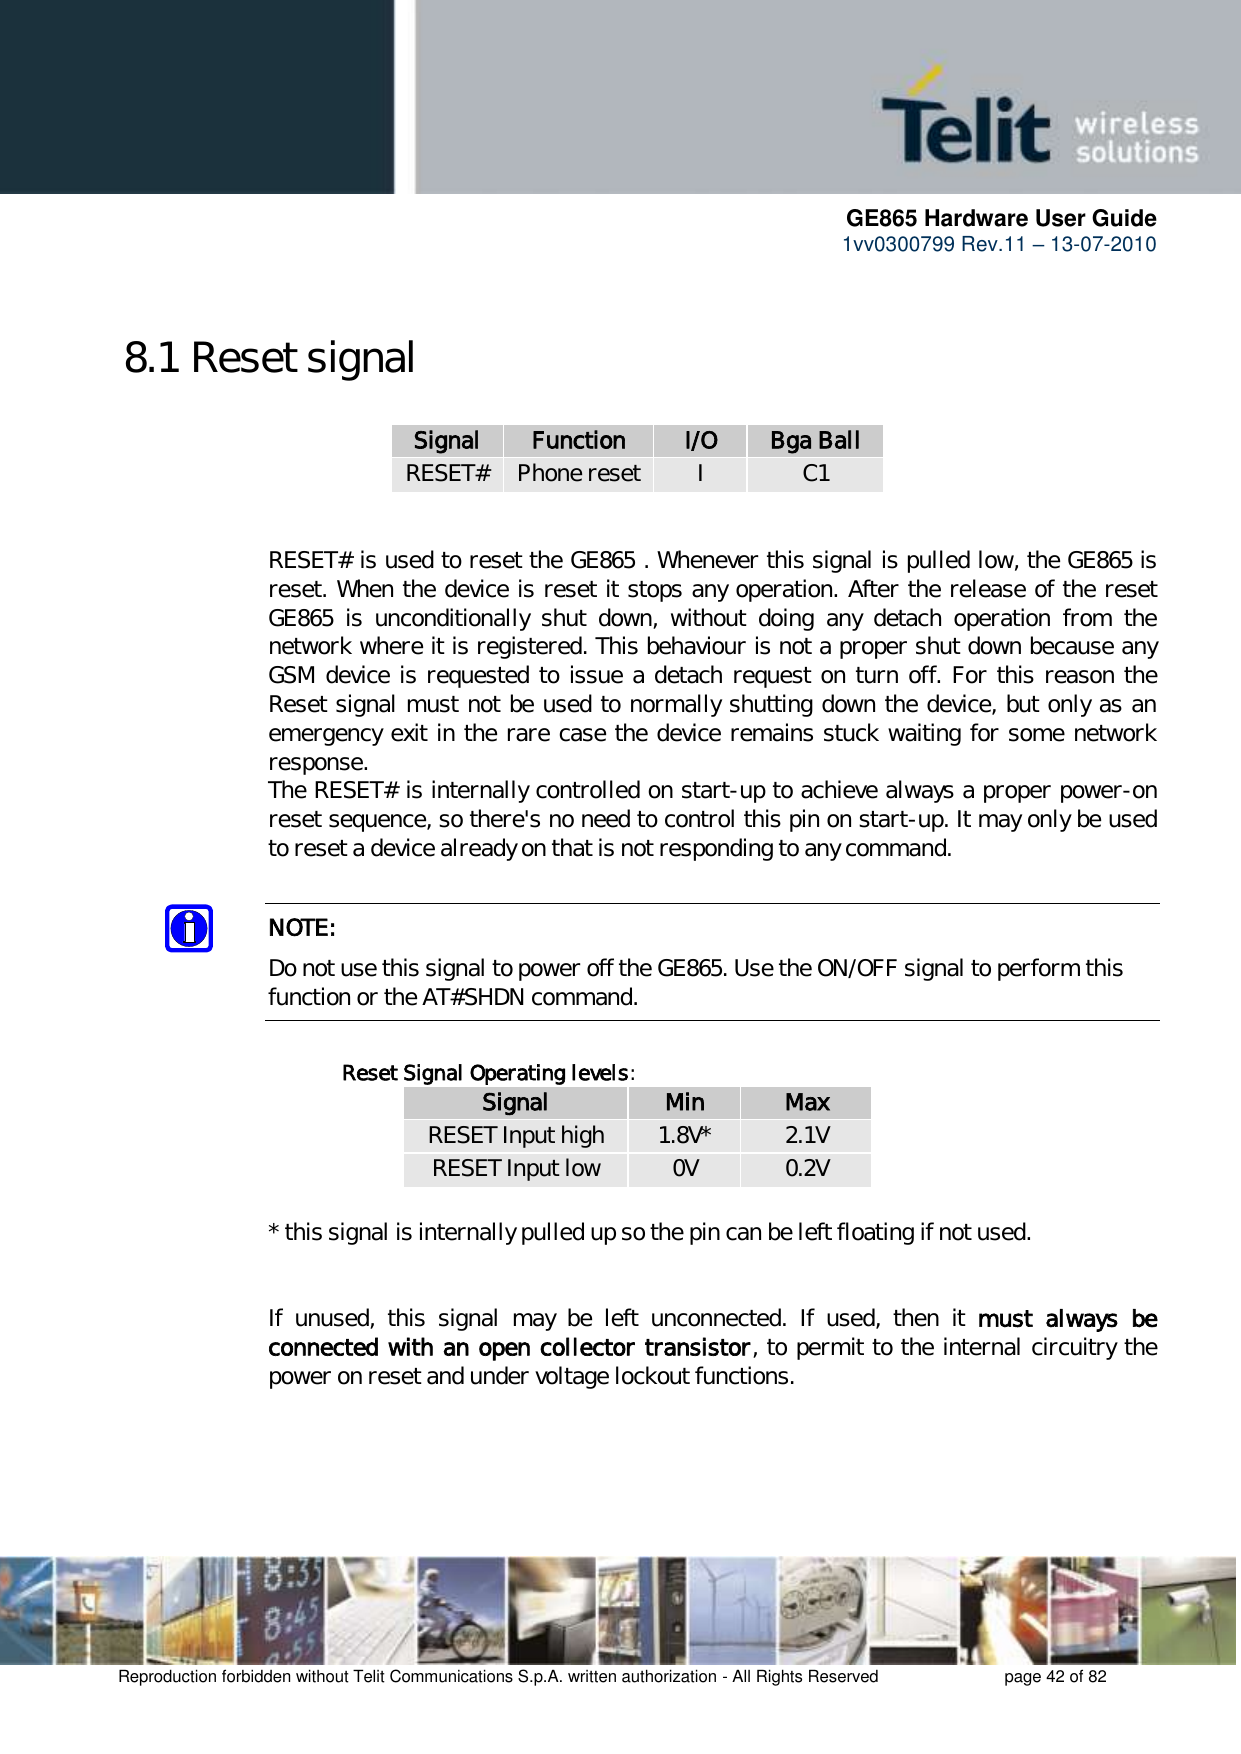      GE865 Hardware User Guide 1vv0300799 Rev.11 – 13-07-2010       Reproduction forbidden without Telit Communications S.p.A. written authorization - All Rights Reserved    page 42 of 82  8.1 Reset signal  Signal Function I/O Bga Ball RESET# Phone reset I C1   RESET# is used to reset the GE865 . Whenever this signal is pulled low, the GE865 is reset. When the device is reset it stops any operation. After the release of the reset GE865  is  unconditionally  shut  down,  without  doing  any  detach  operation  from  the network where it is registered. This behaviour is not a proper shut down because any GSM device is requested to issue a detach request on turn off. For this reason the Reset signal must not be used to normally shutting down the device, but only as an emergency exit in the rare case the device remains stuck waiting for some network response. The RESET# is internally controlled on start-up to achieve always a proper power-on reset sequence, so there&apos;s no need to control this pin on start-up. It may only be used to reset a device already on that is not responding to any command.  NOTE: Do not use this signal to power off the GE865. Use the ON/OFF signal to perform this function or the AT#SHDN command.  Reset Signal Operating levels: Signal Min Max RESET Input high 1.8V* 2.1V RESET Input low 0V 0.2V  * this signal is internally pulled up so the pin can be left floating if not used.   If  unused,  this  signal  may  be  left  unconnected.  If  used,  then  it  must  always  be connected with an open collector transistor, to permit to the internal circuitry the power on reset and under voltage lockout functions.      